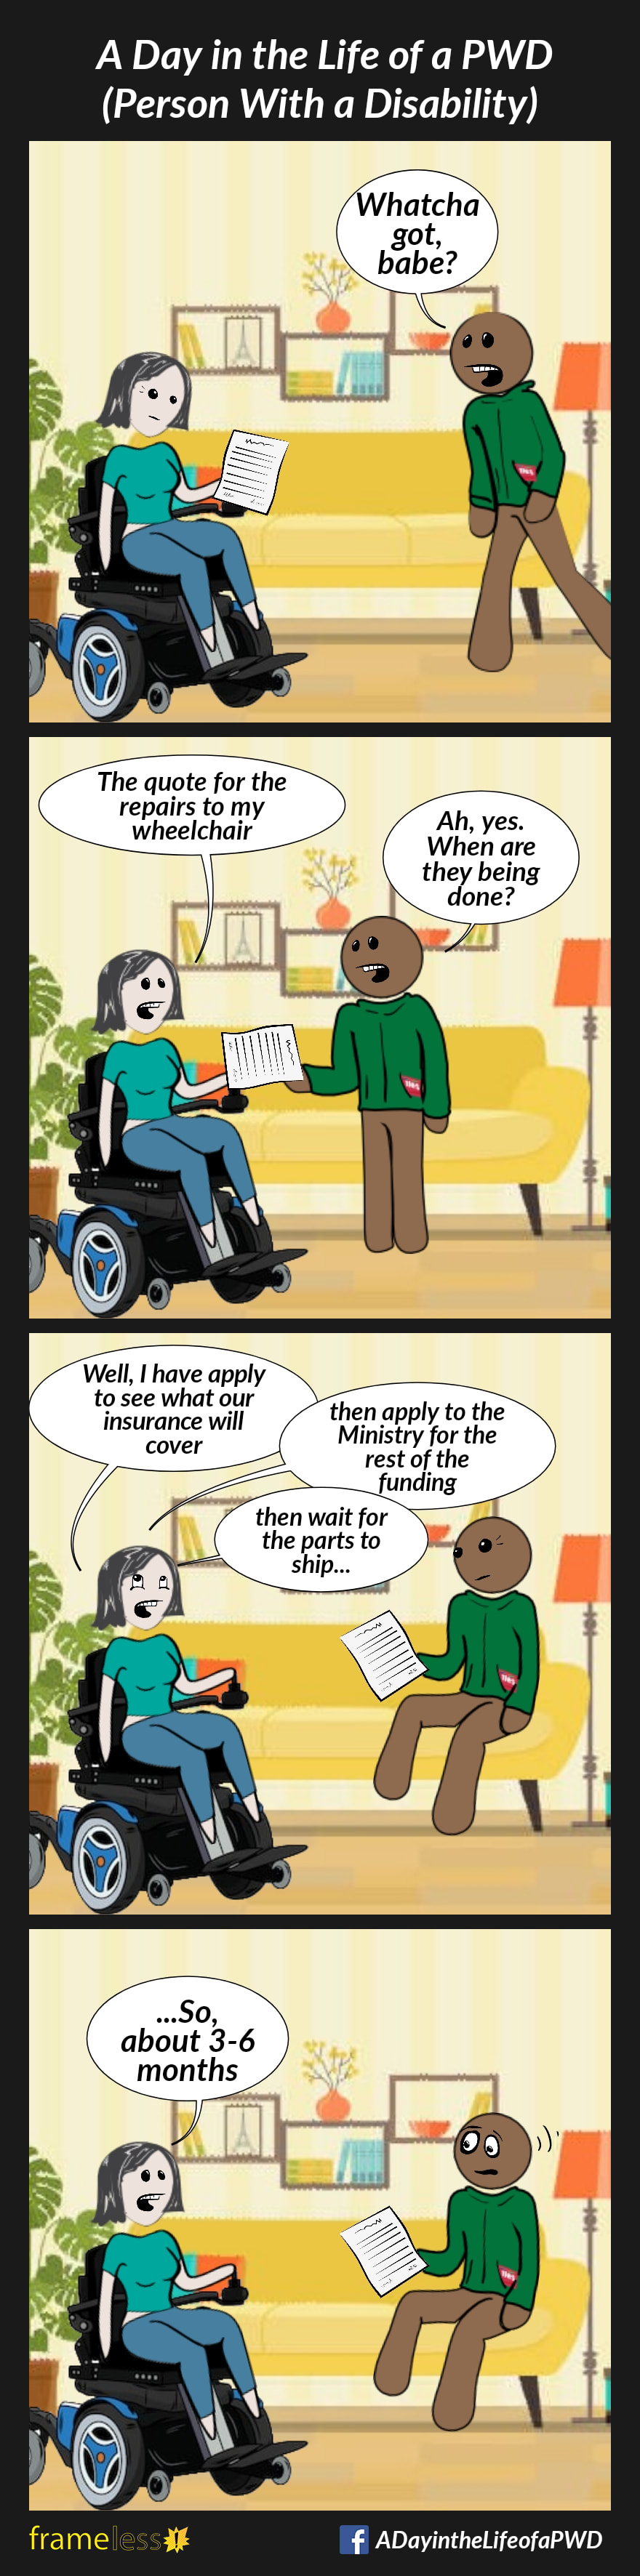 COMIC STRIP 
A Day in the Life of a PWD (Person With a Disability) 

Frame 1:
A woman in a power wheelchair is sittin her livingroom studying a document. 
Her husband enters.
HUSBAND: Whatcha got, babe?

Frame 2:
WOMAN: The quote for the repairs to my wheelchair 
HUSBAND: Ah, yes. When are they being done?

Frame 3:
WOMAN: Well, I have to apply to see what our insurance will cover...then apply to the Ministry for the rest of the funding...then wait for the parts to ship...

Frame 4:
WOMAN: ...so, about 3-6 months